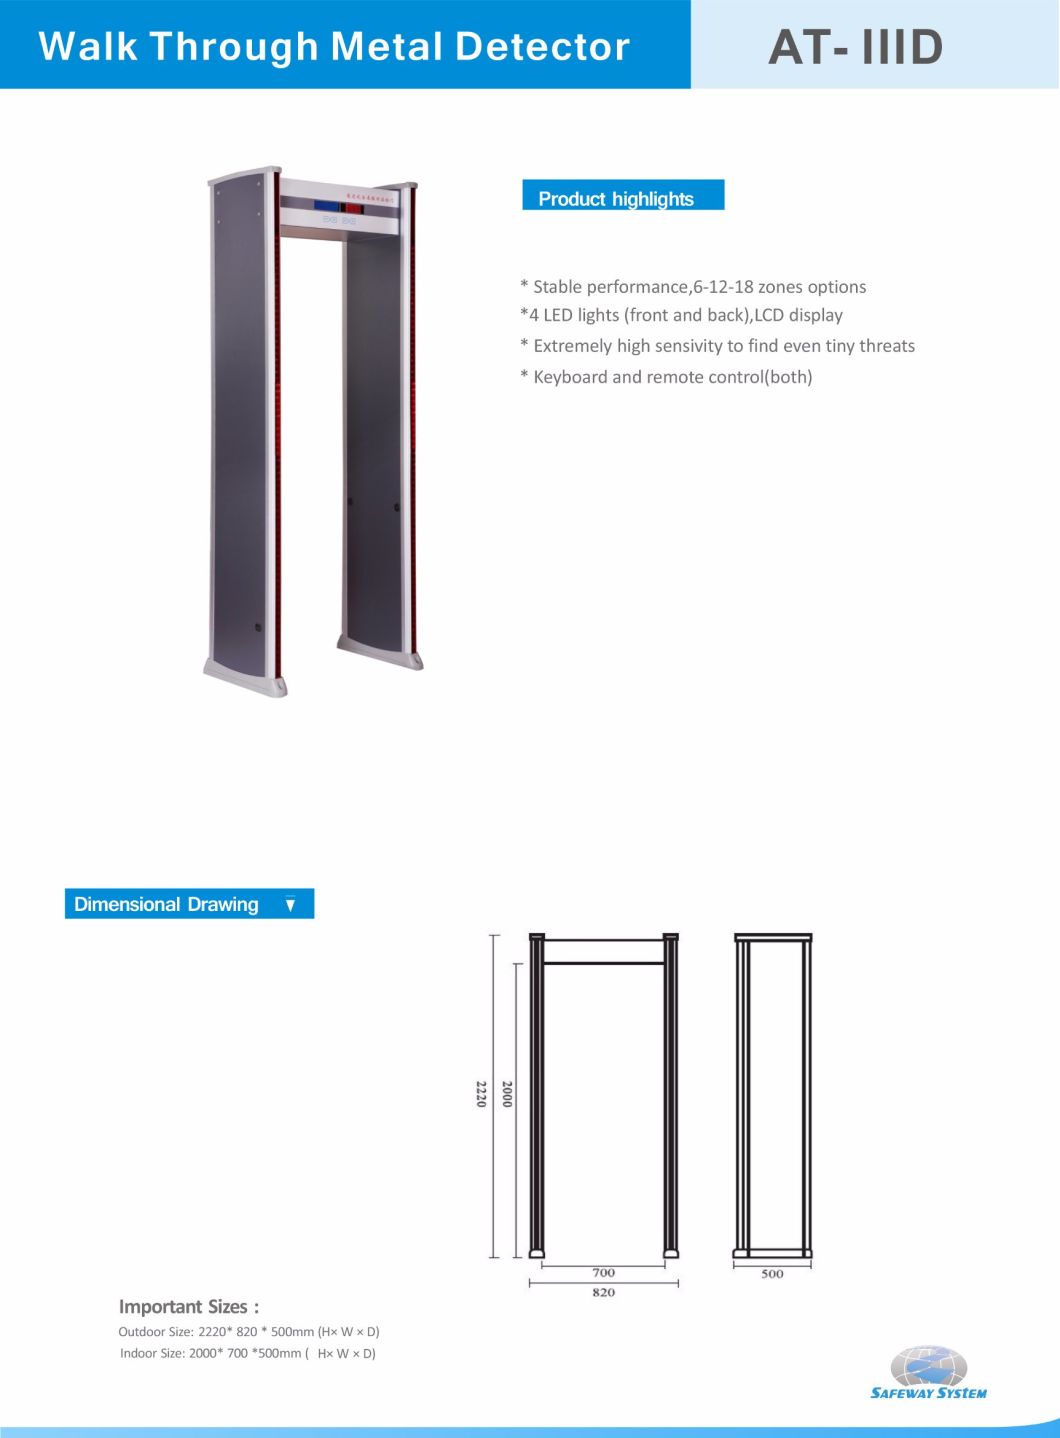 Security Products High Sensitivity Archway Walk Through Metal Detector (AT-IIID)